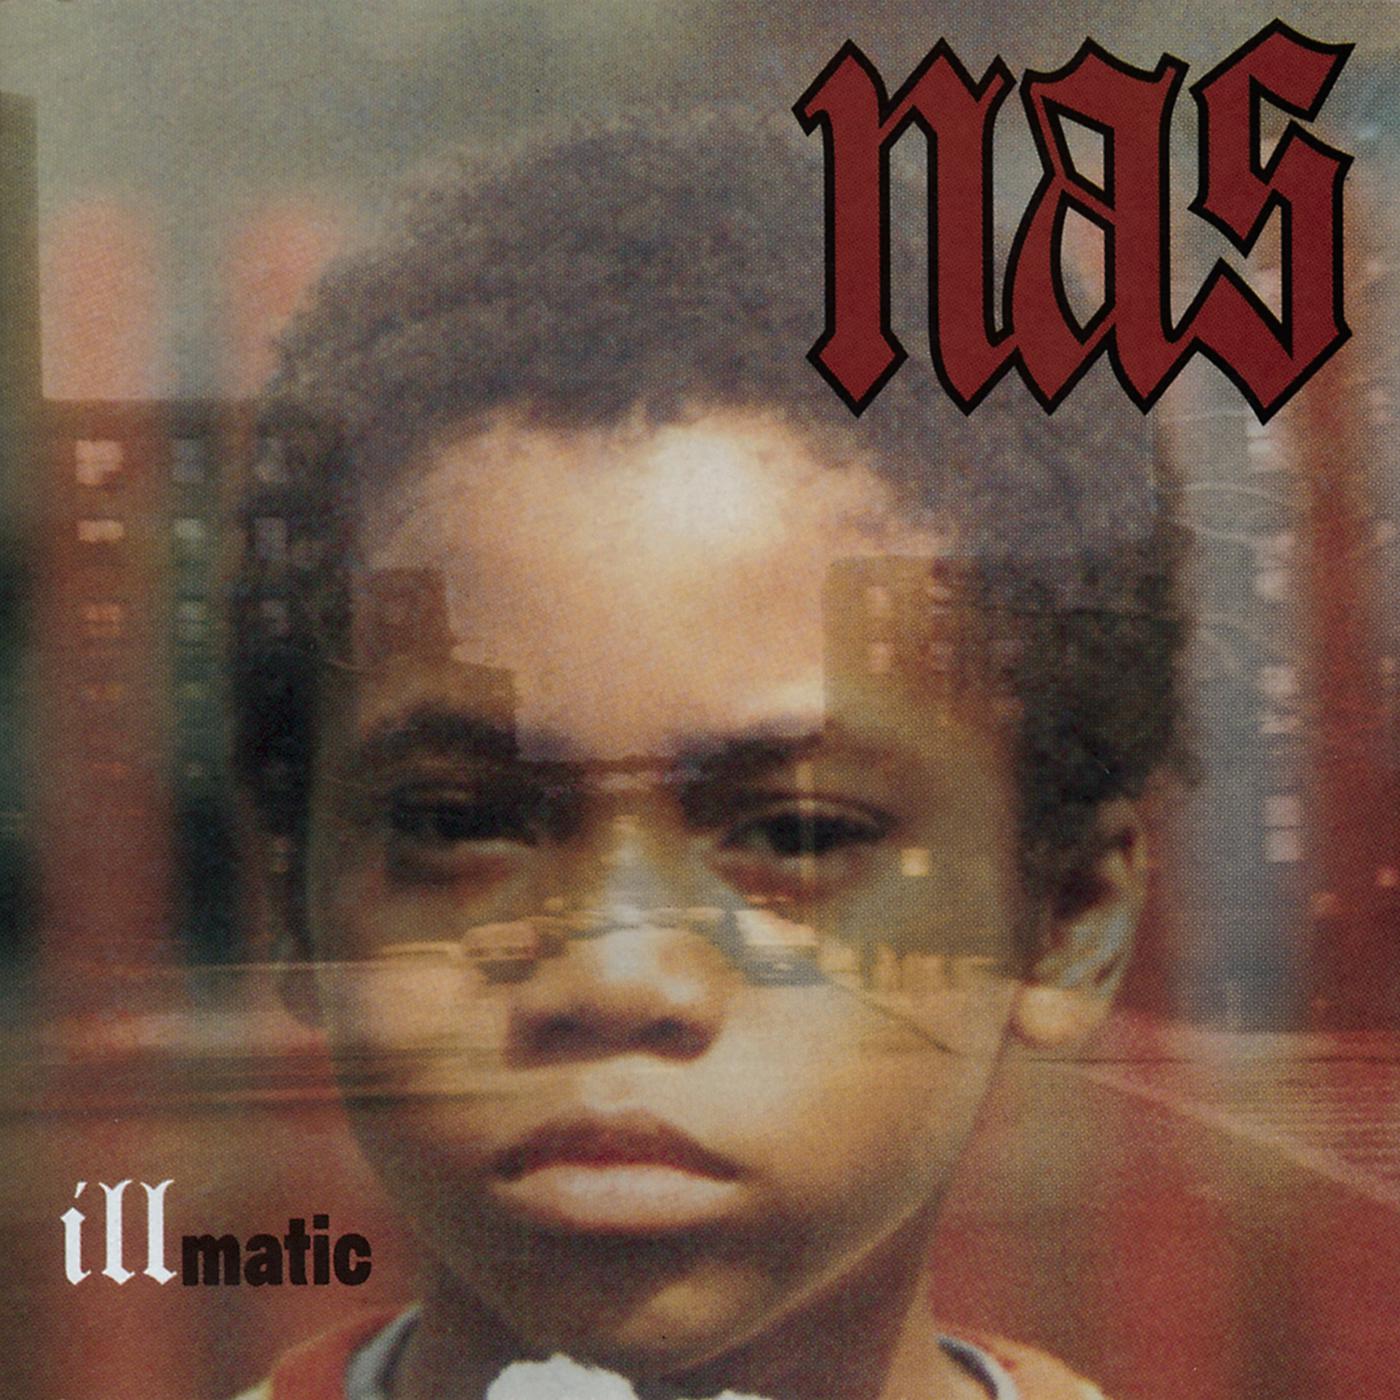 One Time 4 Your Mind歌词 歌手Nas-专辑Illmatic-单曲《One Time 4 Your Mind》LRC歌词下载